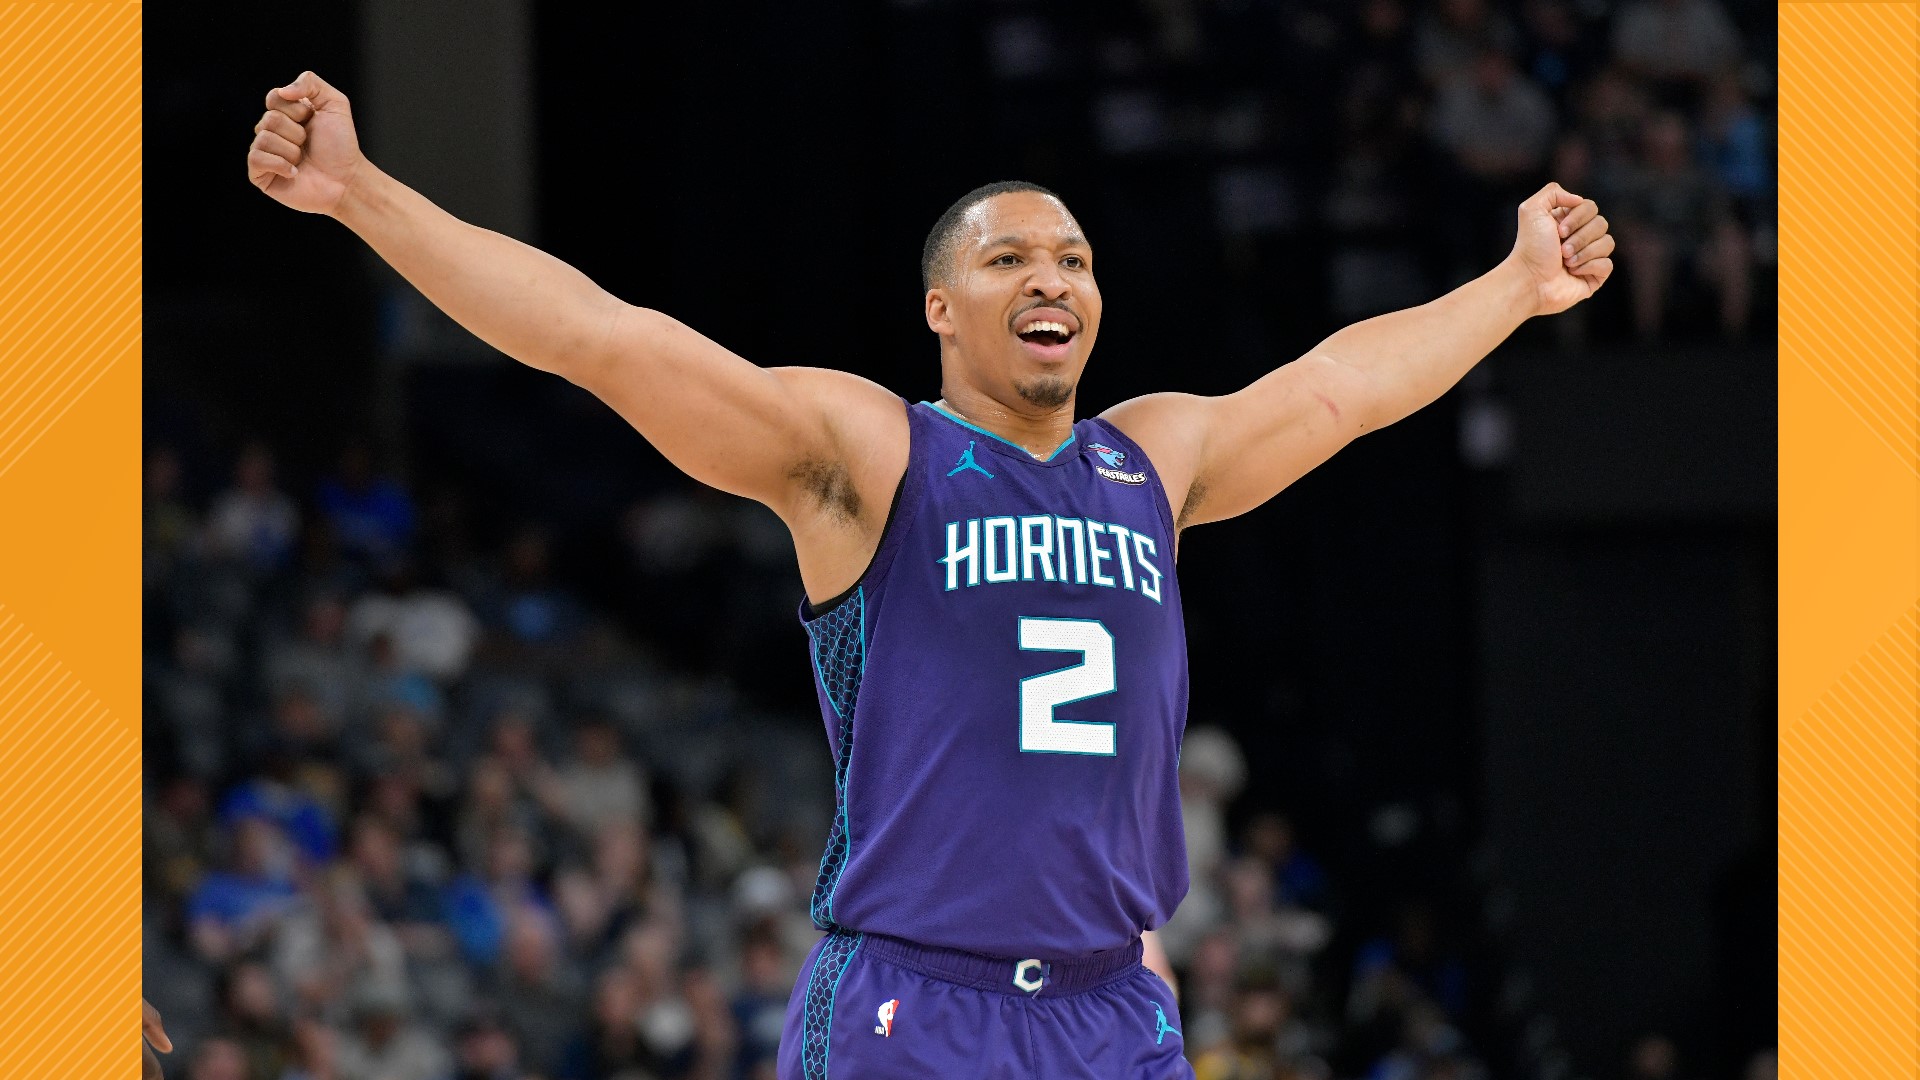 As the Vols play in Charlotte, WBIR spoke with Grant Williams who now plays for the Charlotte Hornets on his take of the Vols this season.